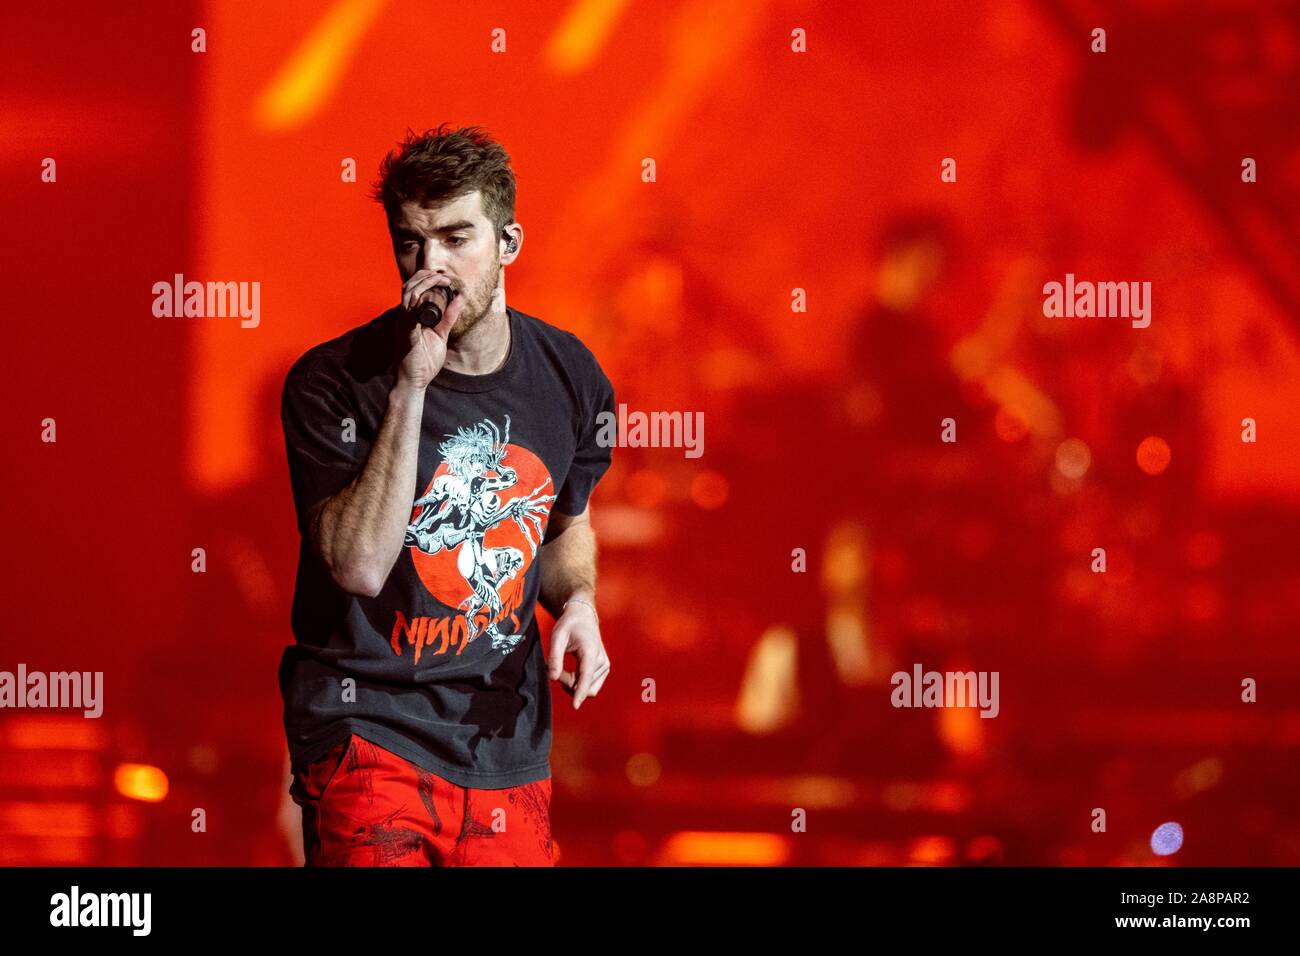 November 9, 2019, Madison, Wisconsin, U.S: ANDREW TAGGART of The Chainsmokers during the World War Joy Tour at the Alliant Energy Center in Madison, Wisconsin (Credit Image: © Daniel DeSlover/ZUMA Wire) Stock Photo